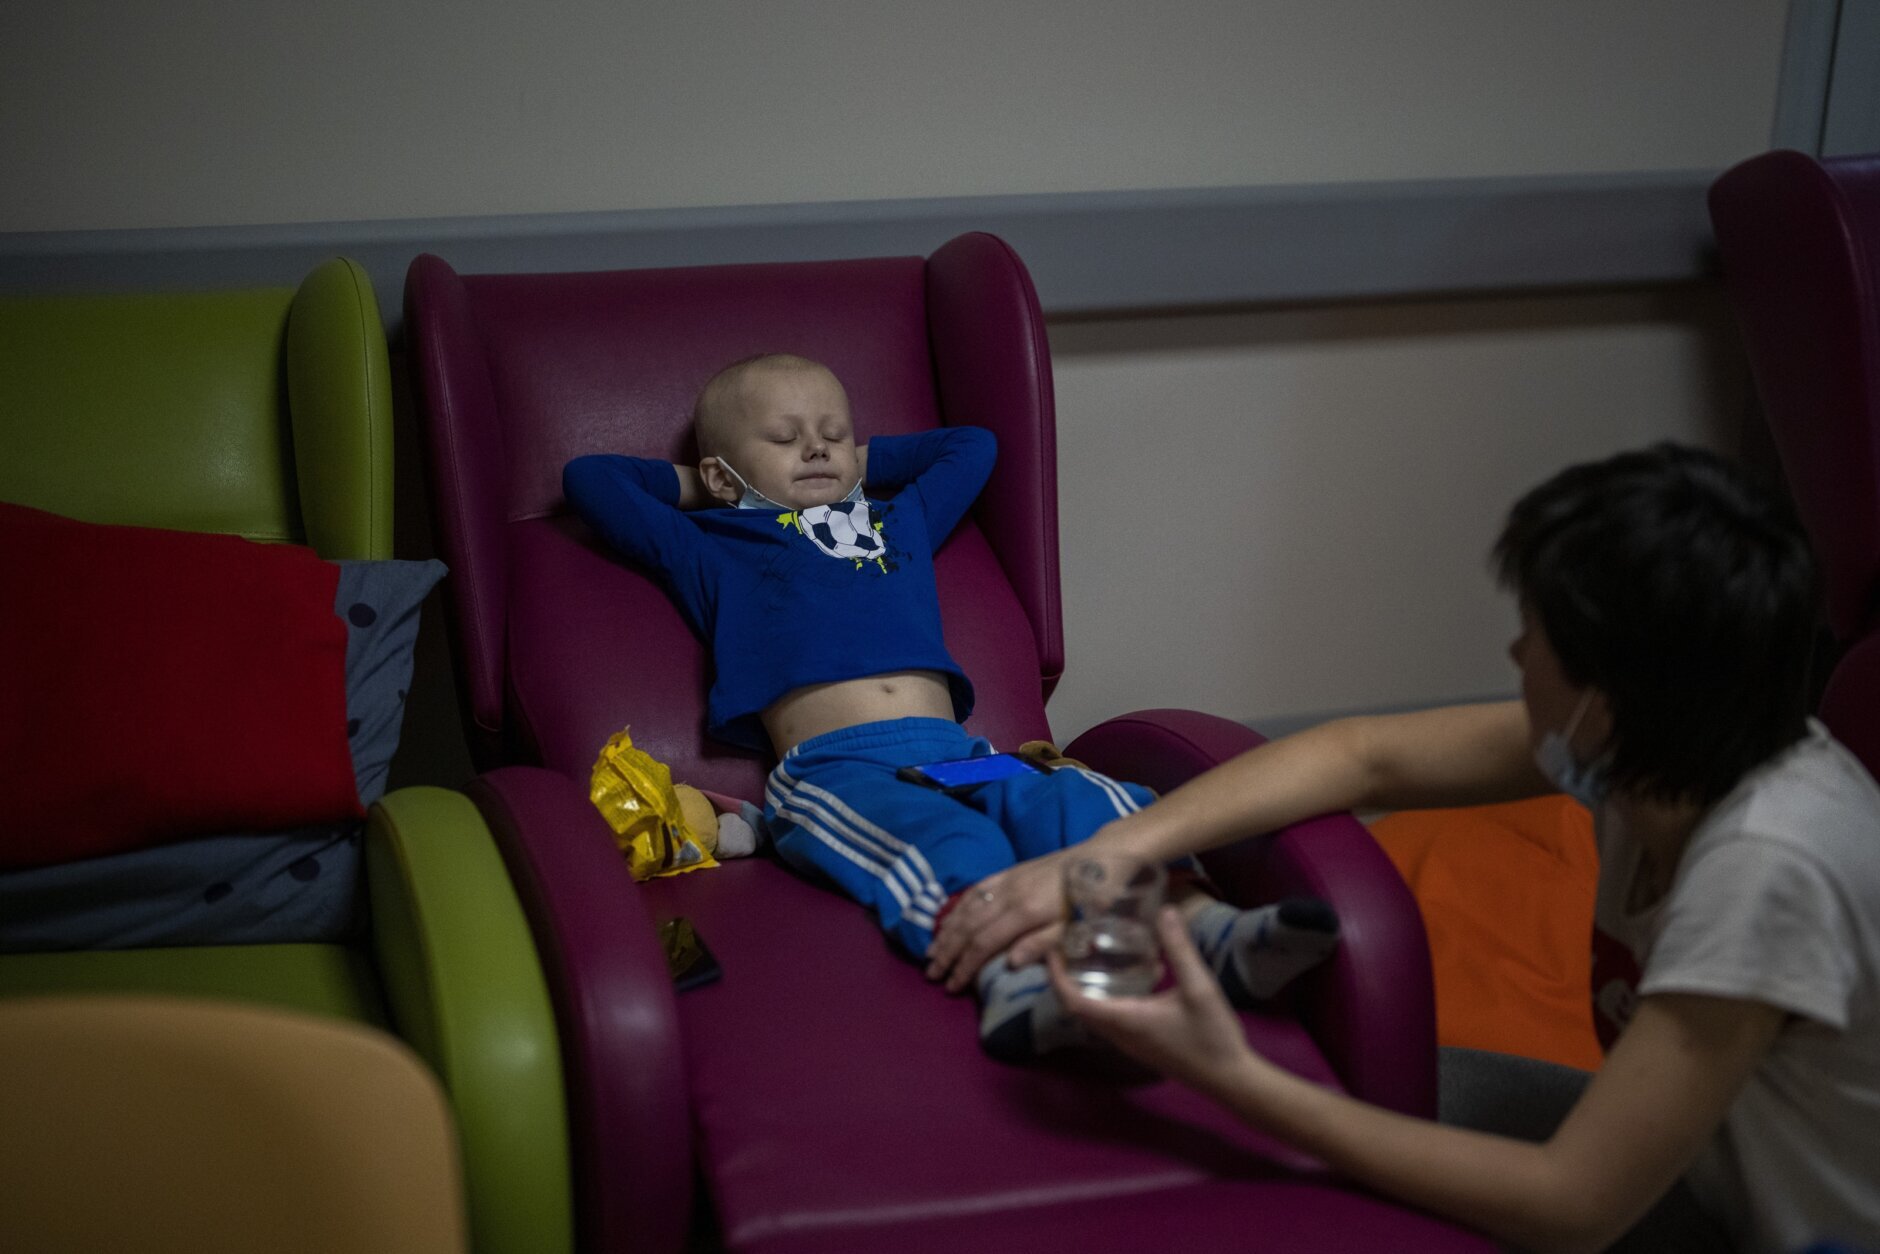 An oncology patient rests on a coach next to his mother, in a basement using it as a bomb shelter, while the sirens sound announcing new attacks, at the Okhmadet children's hospital in central Kyiv, Ukraine, Monday, Feb. 28, 2022. (AP Photo/Emilio Morenatti)